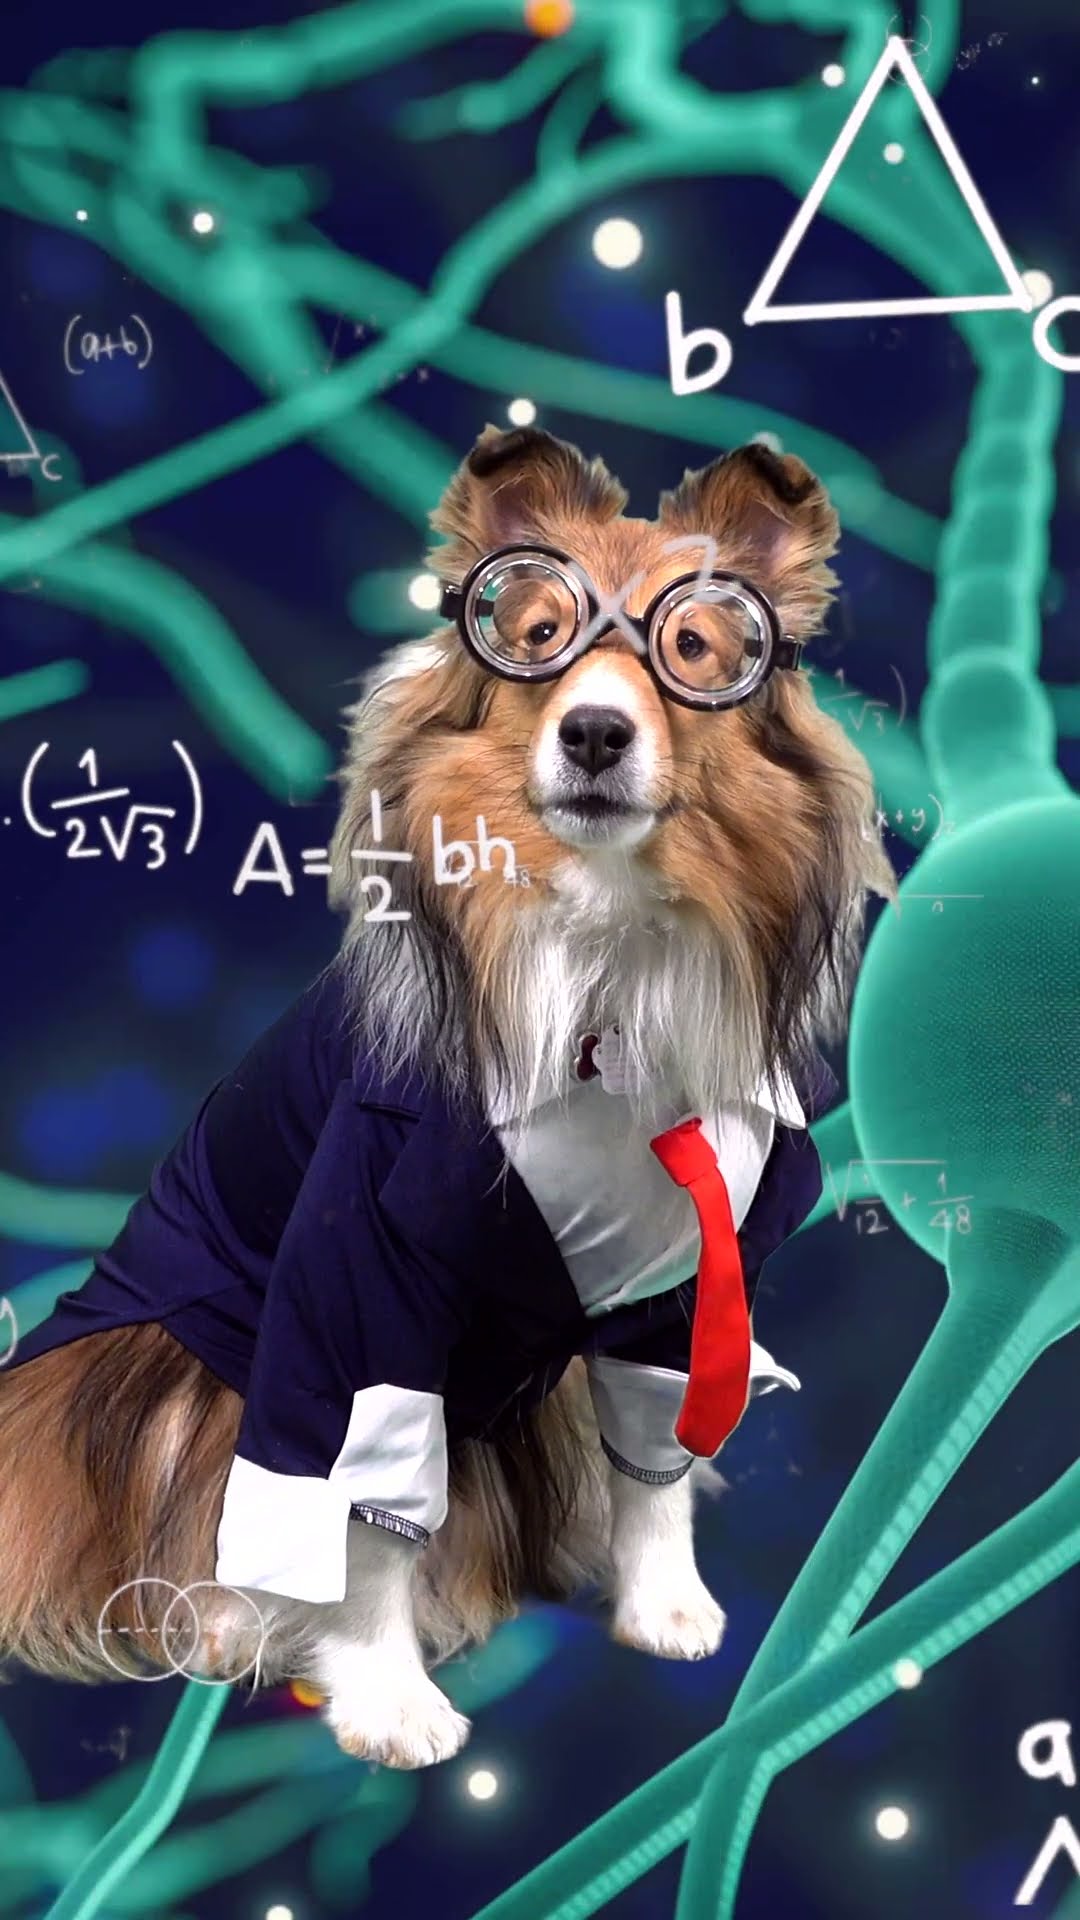 A love/hate relationship with MATH! Subscribe to Cricket "the sheltie" Chronicles 421-2